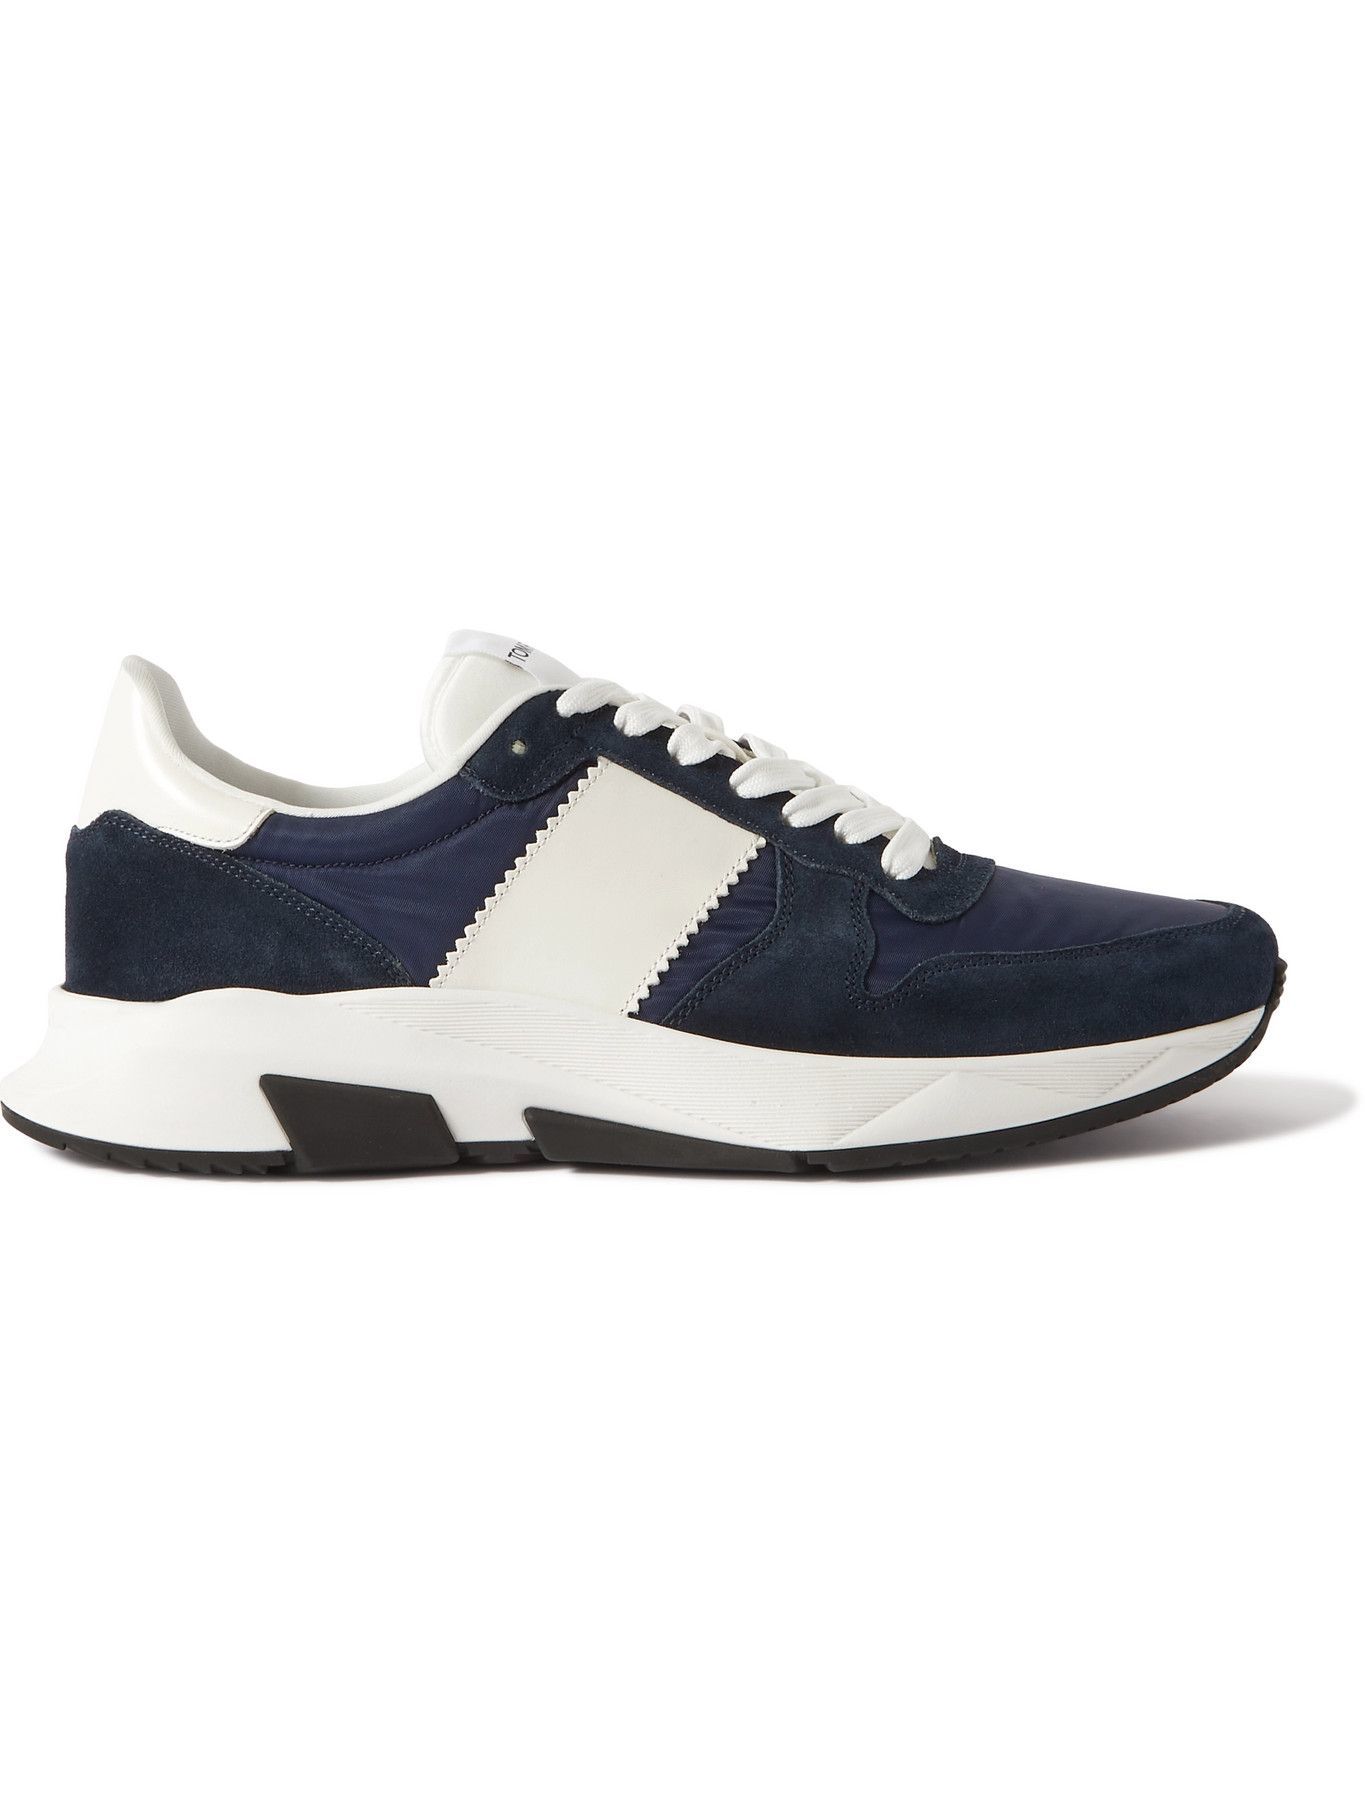 TOM FORD - Jagga Leather-Trimmed Nylon and Suede Sneakers - Blue TOM FORD